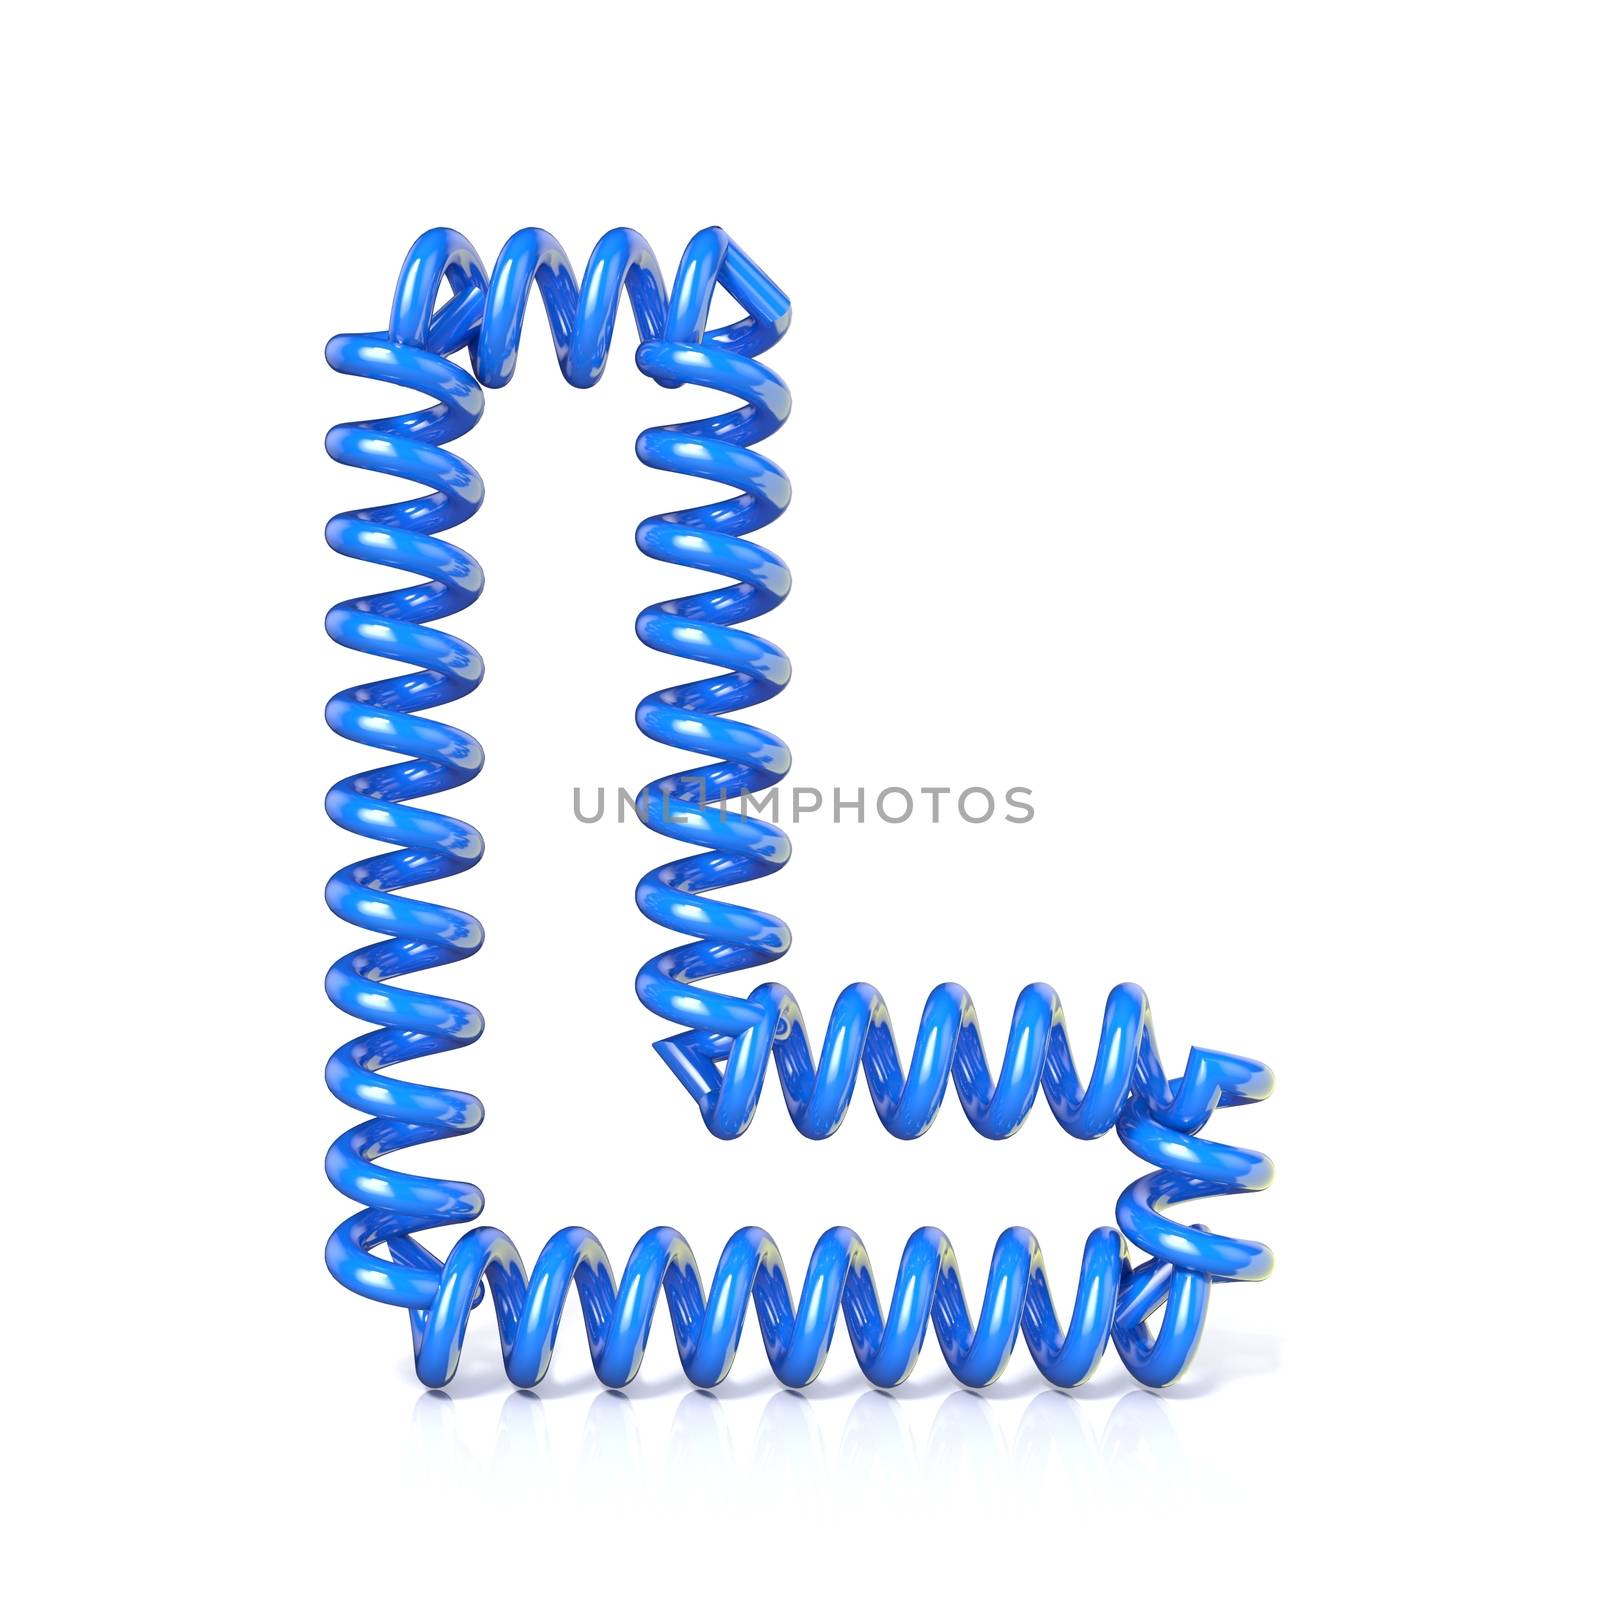 Spring, spiral cable font collection letter - L. 3D render illustration, isolated on white background